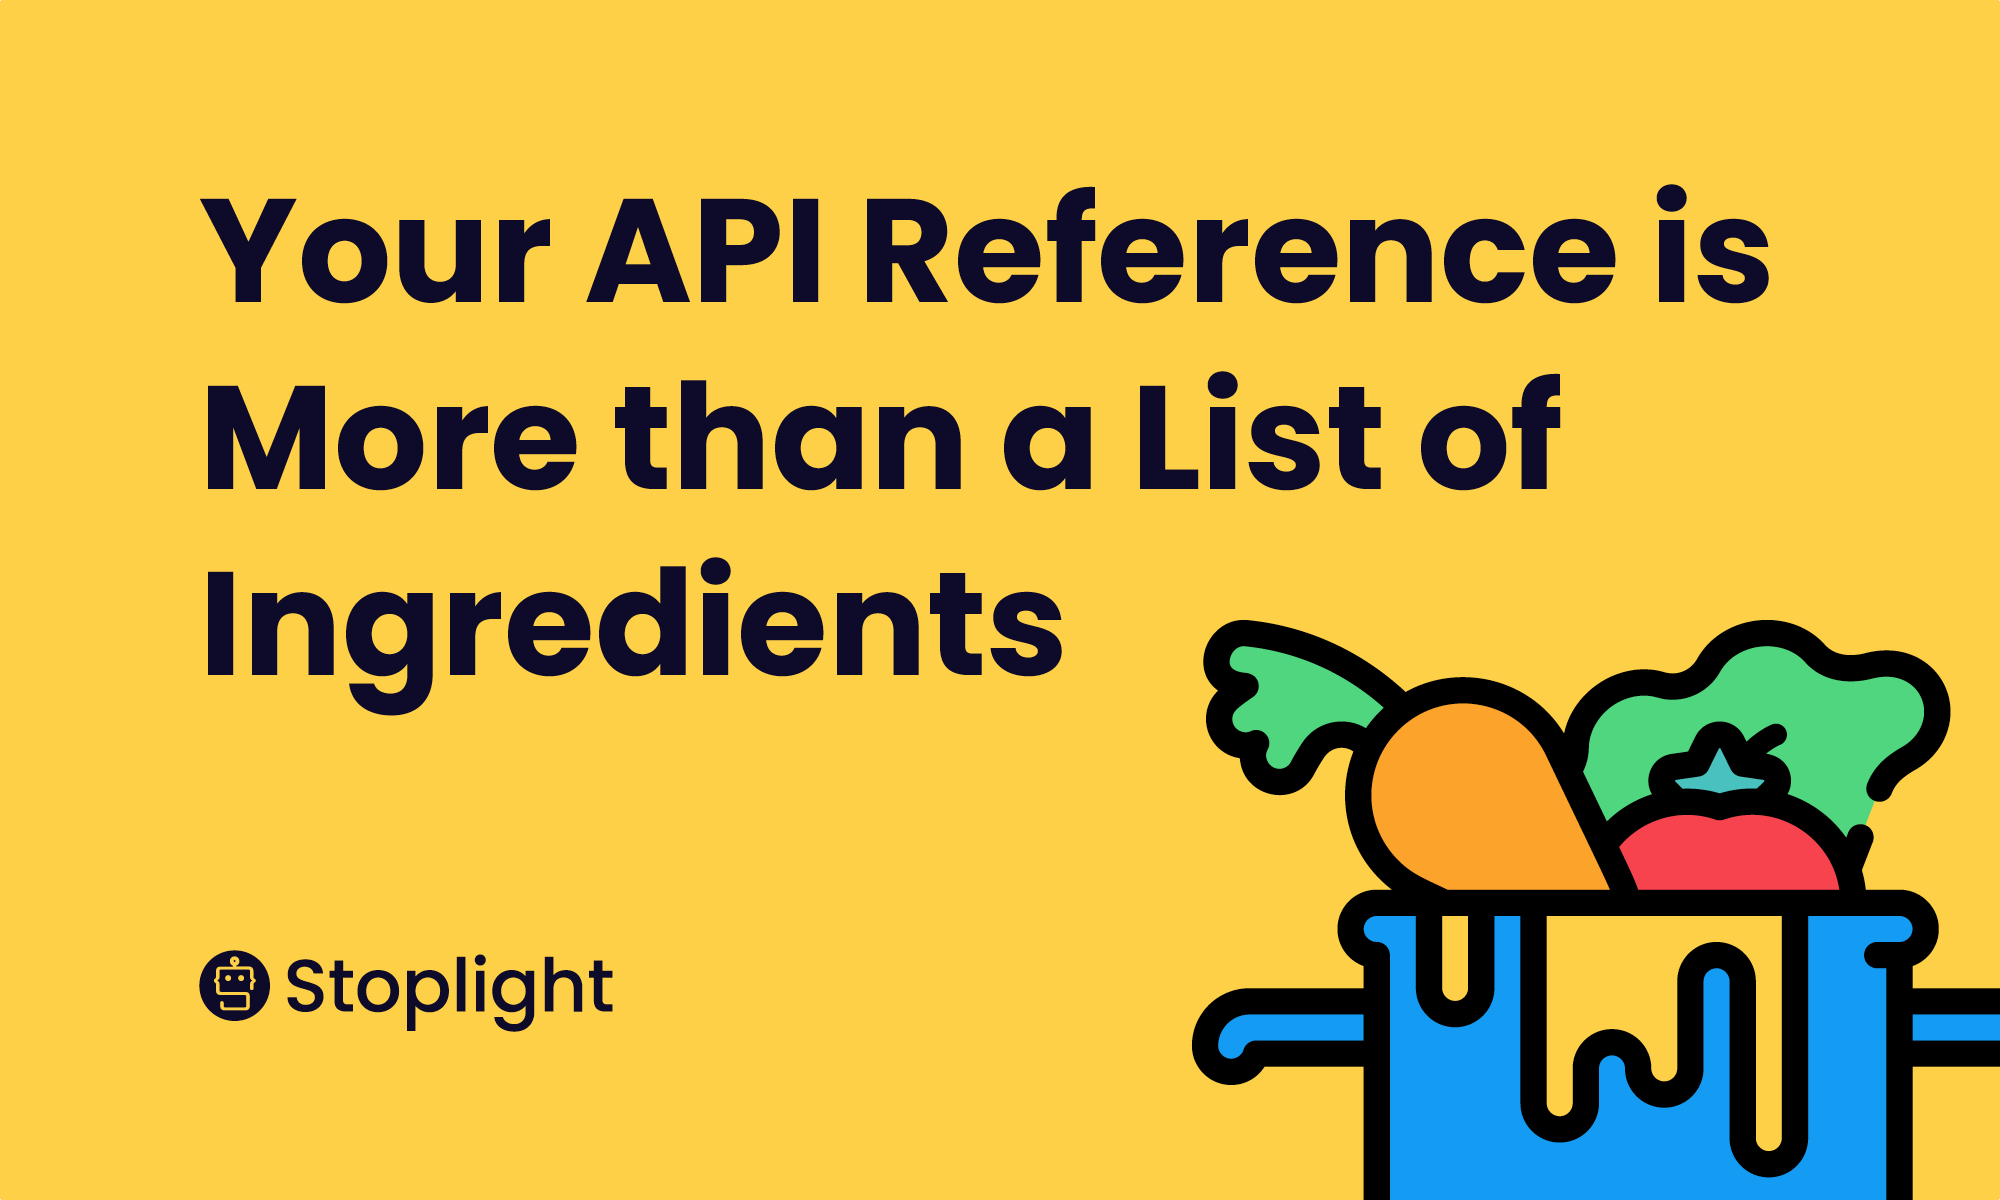 Your API Reference is More than a List of Ingredients